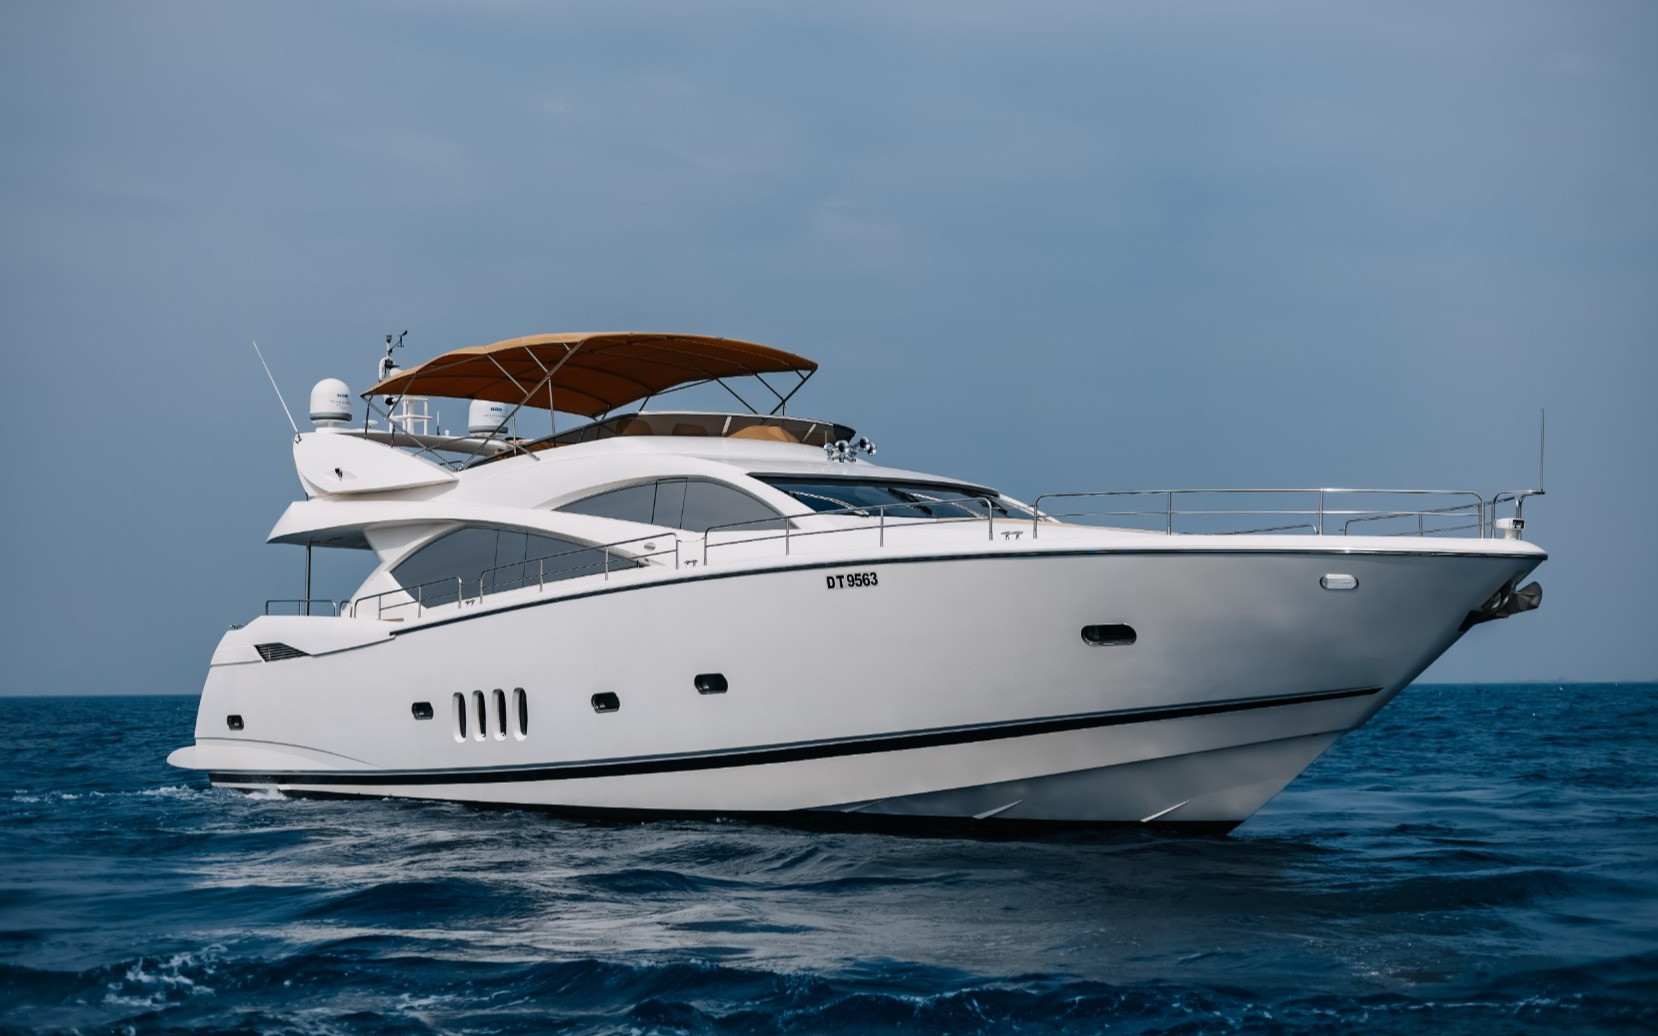 Sail into Sophistication Yacht Rentals in Dubai's Waters